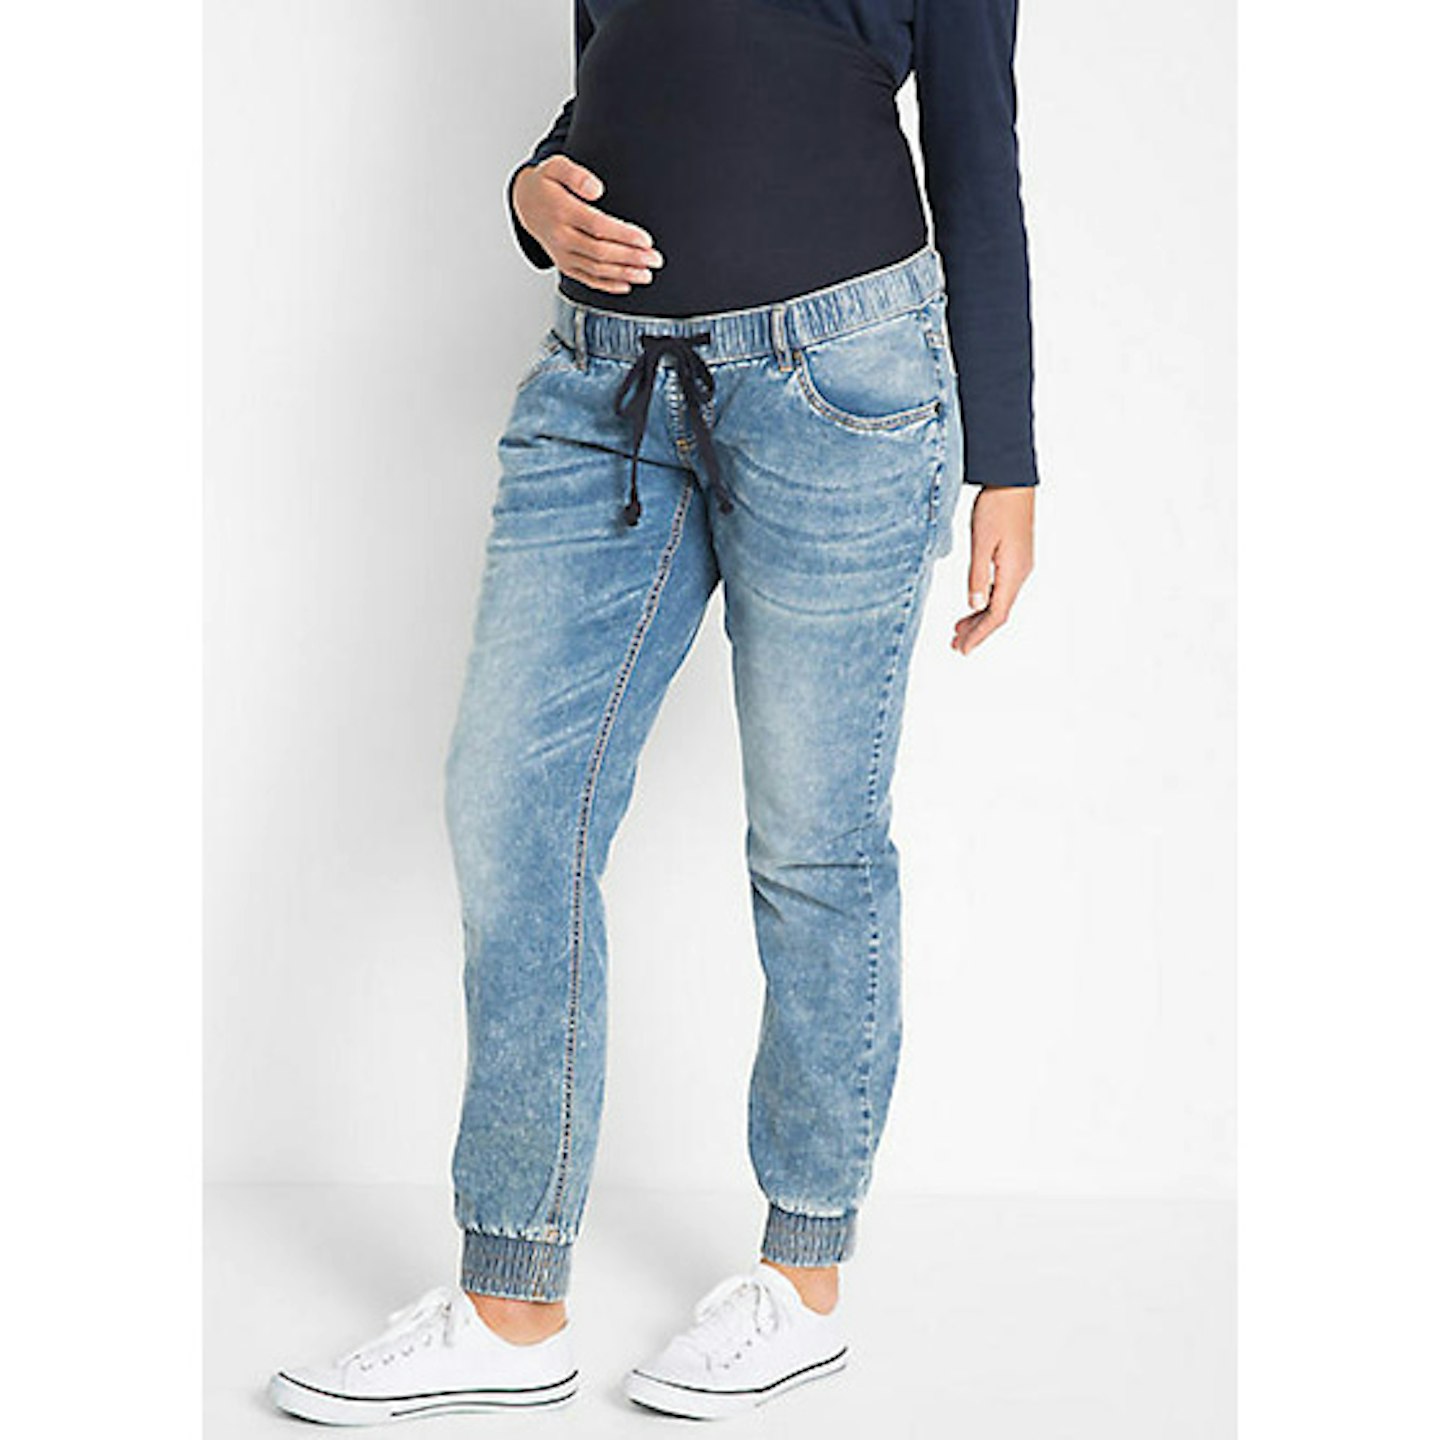 5 Pocket Maternity Jeans- plus size maternity clothes